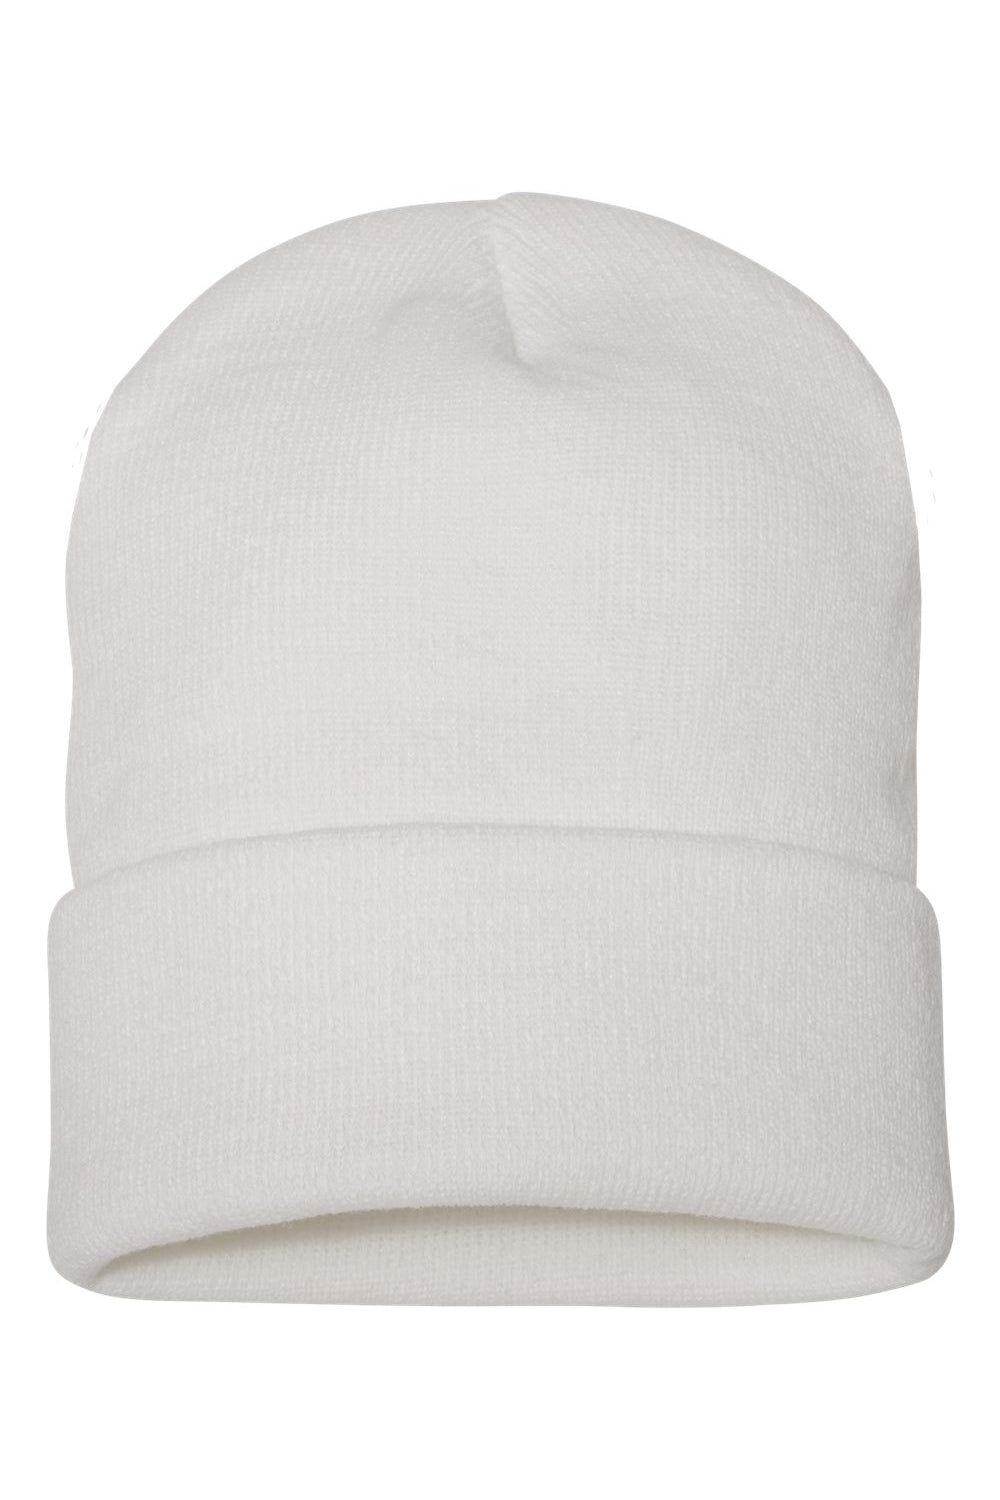 Yupoong 1501KC Mens Cuffed Beanie White Flat Front